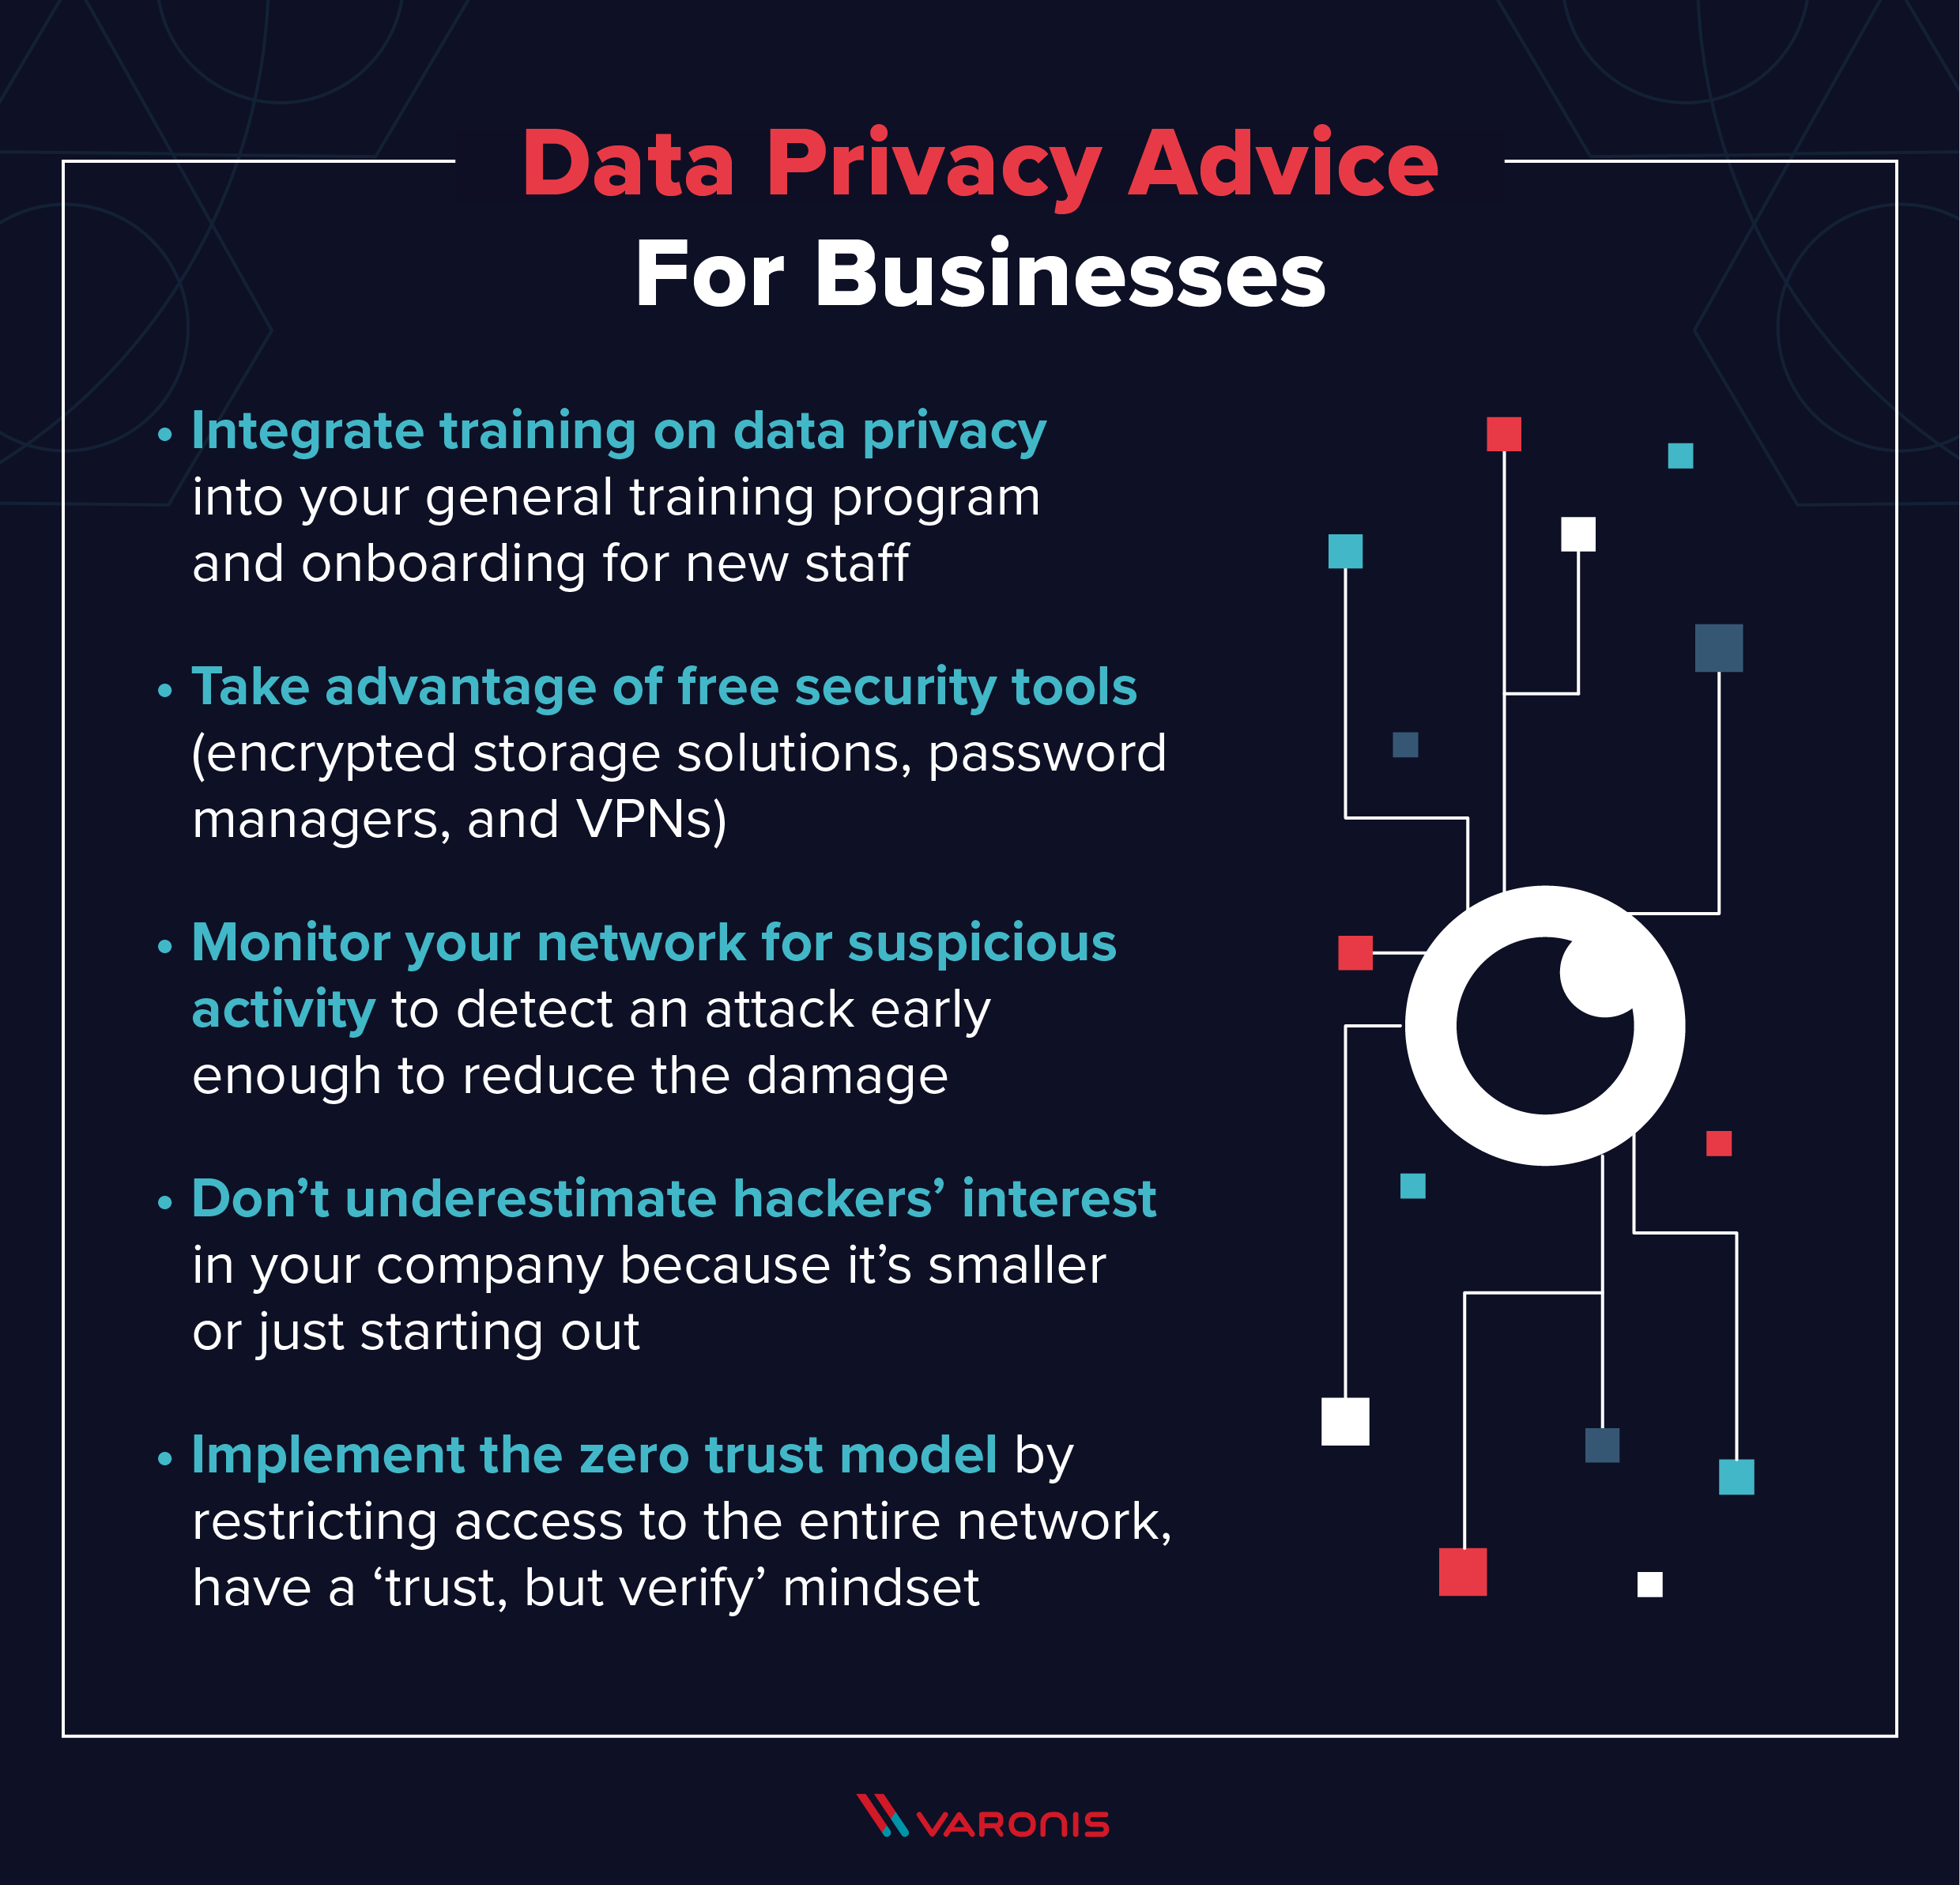 A bulleted list of advice on data privacy for businesses